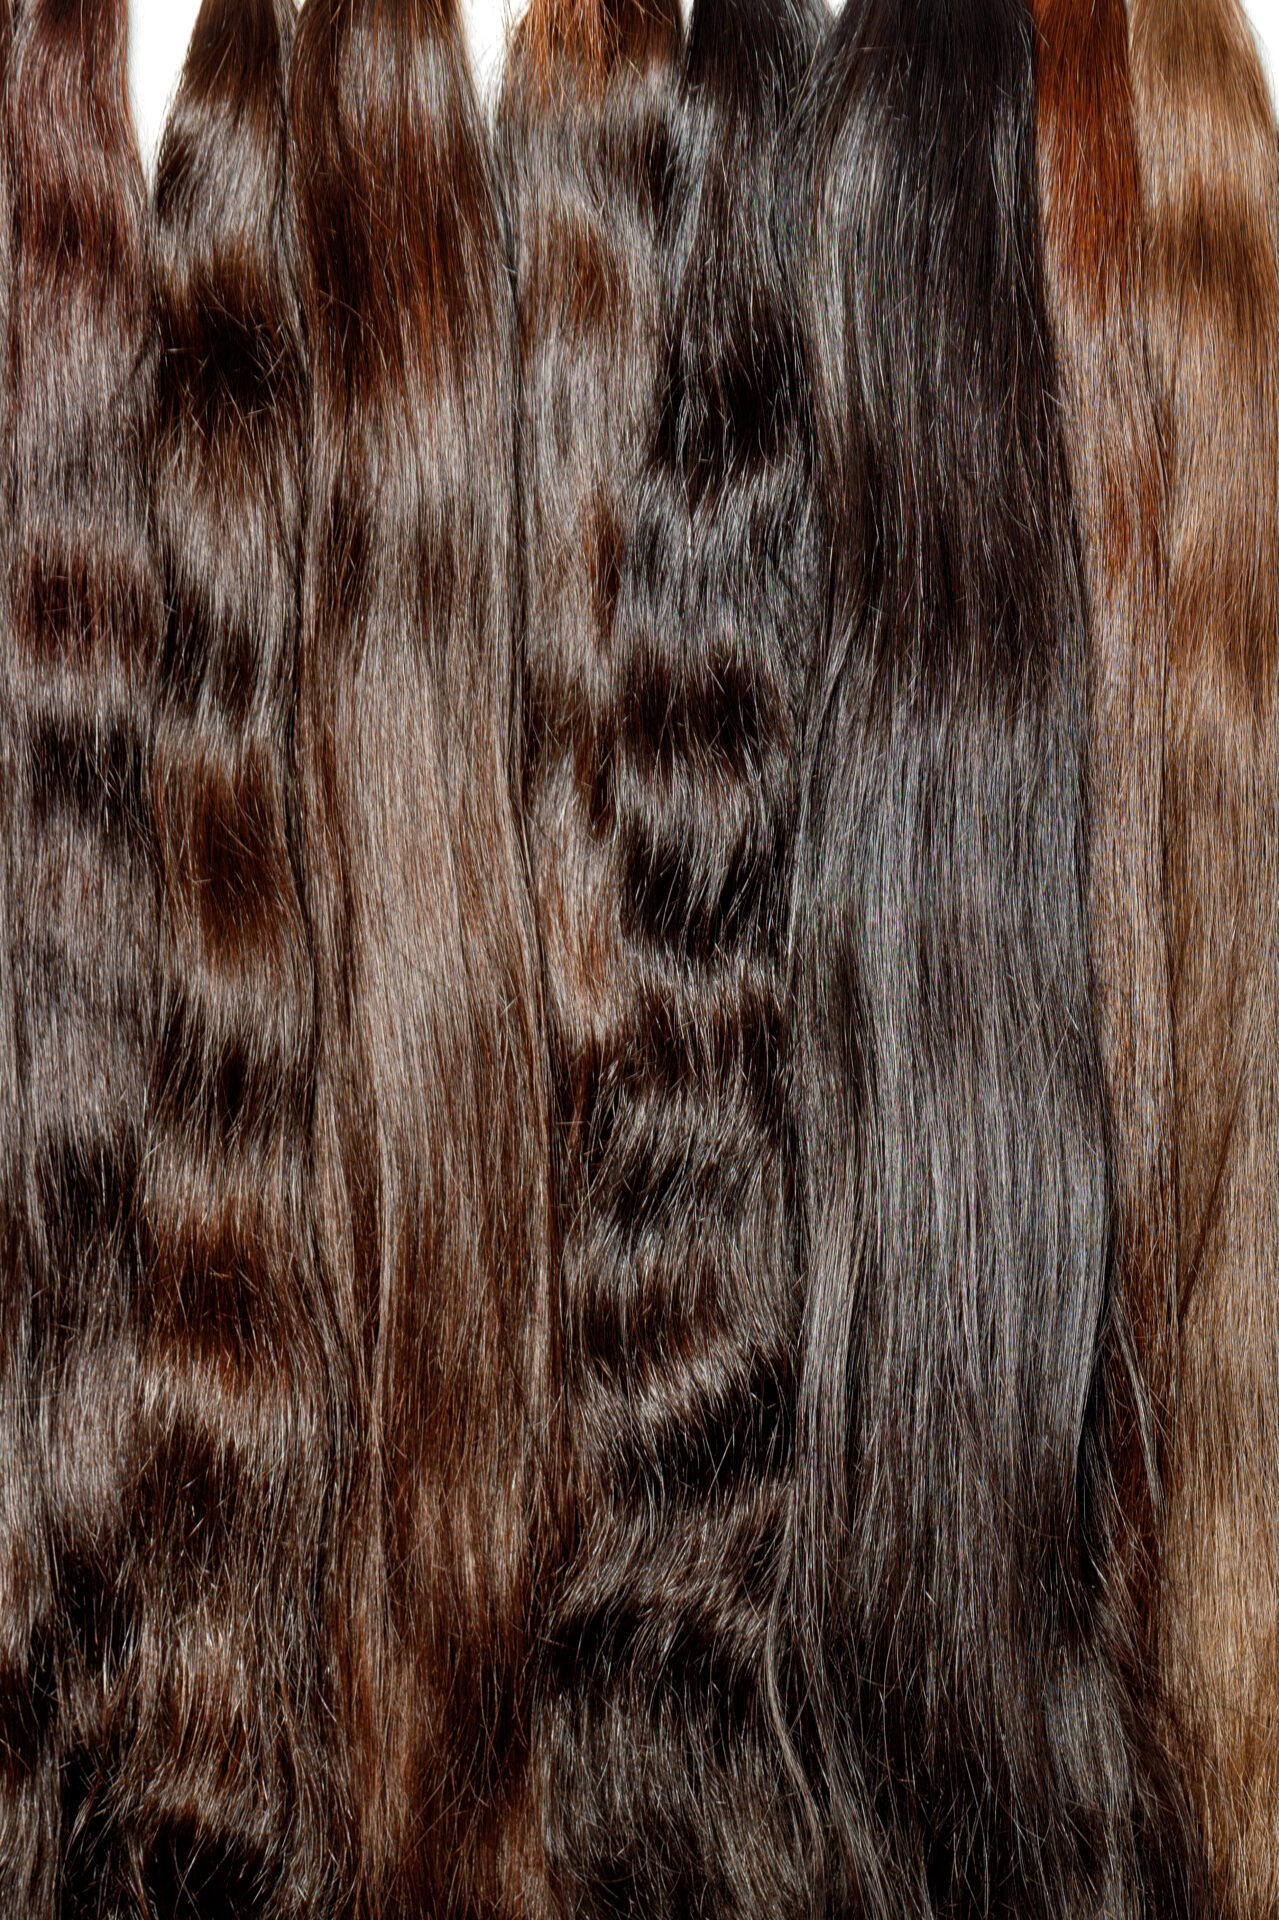 Bundles of natural shiny healthy human hair in various chocolate shades for extensions are used in the beauty industry. Vertical image, copy space.